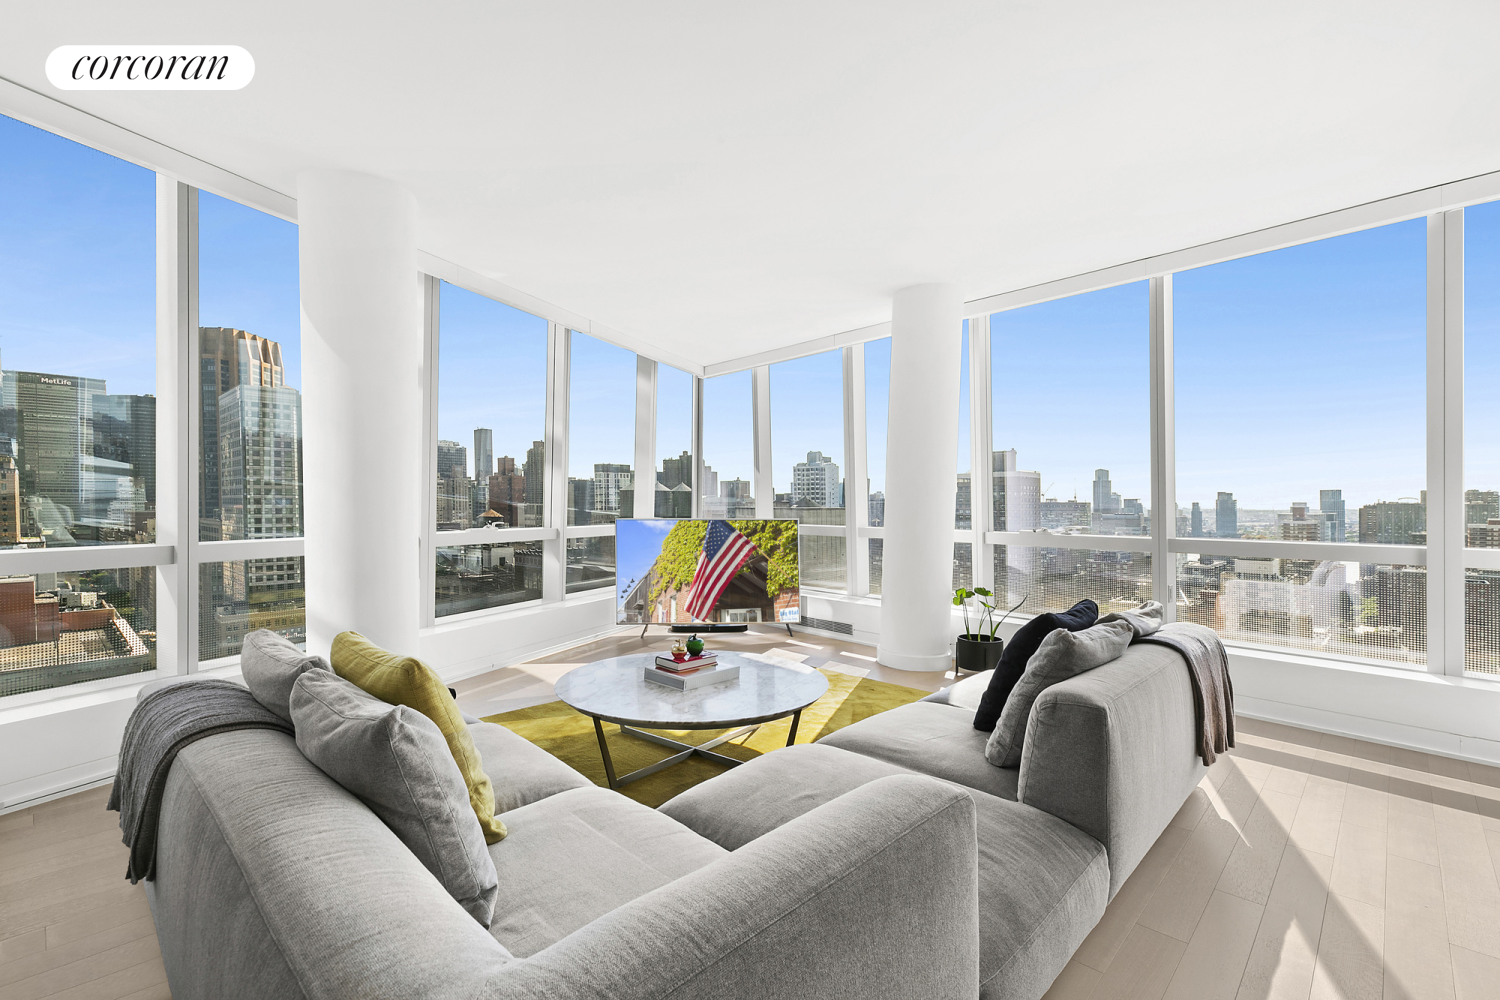 400 Park Avenue 27C, Nomad, Downtown, NYC - 3 Bedrooms  
3 Bathrooms  
7 Rooms - 